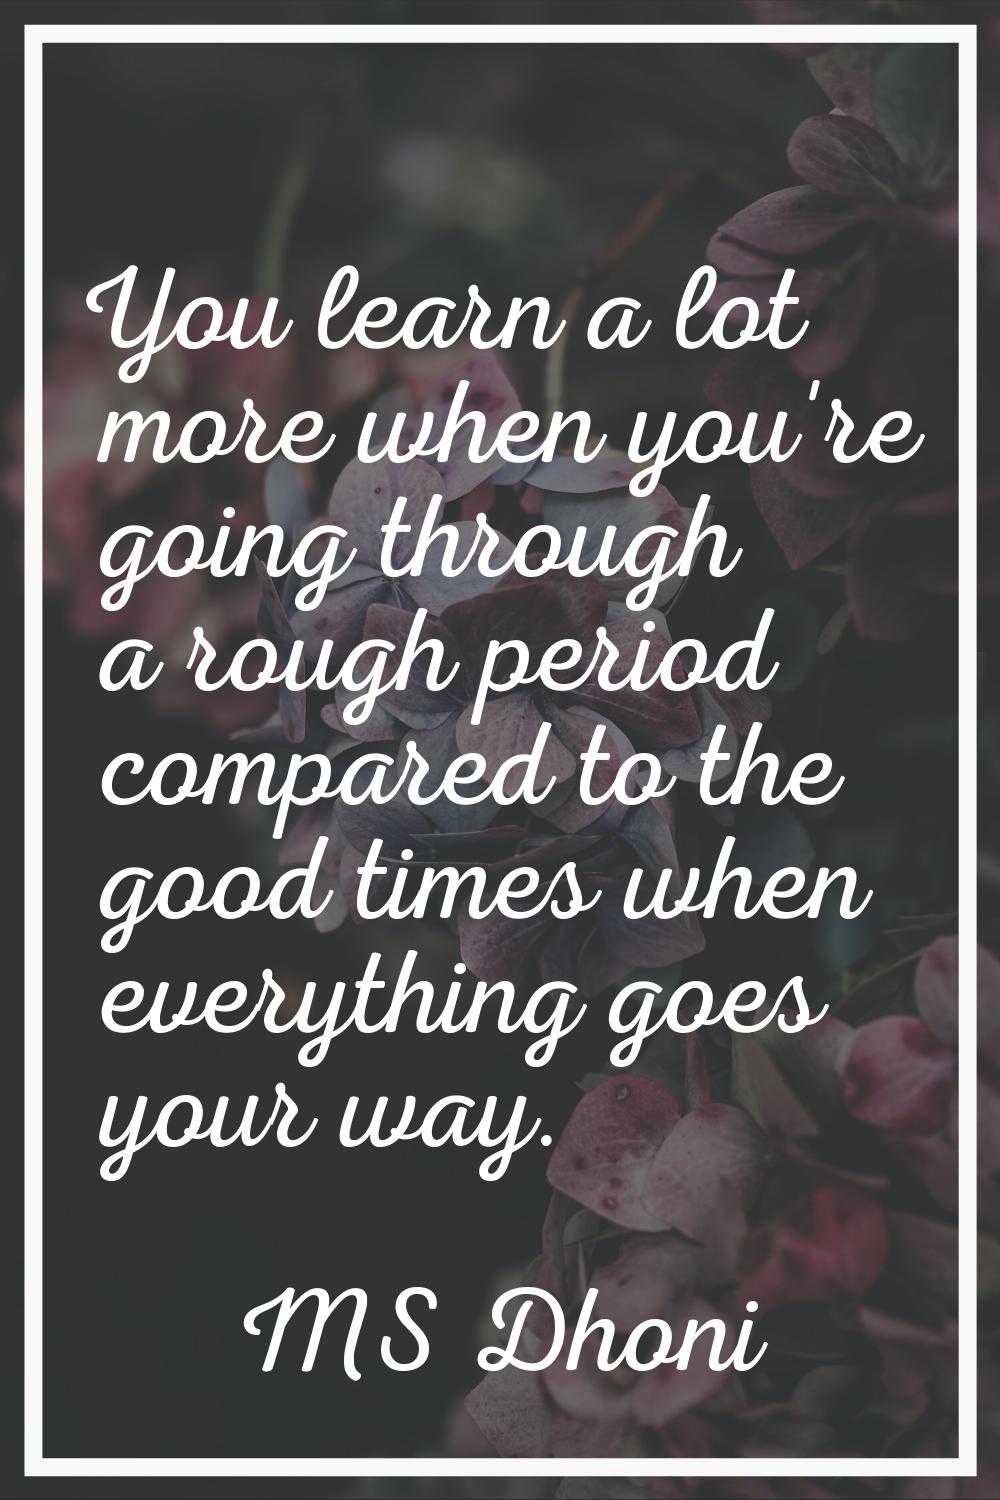 You learn a lot more when you're going through a rough period compared to the good times when every